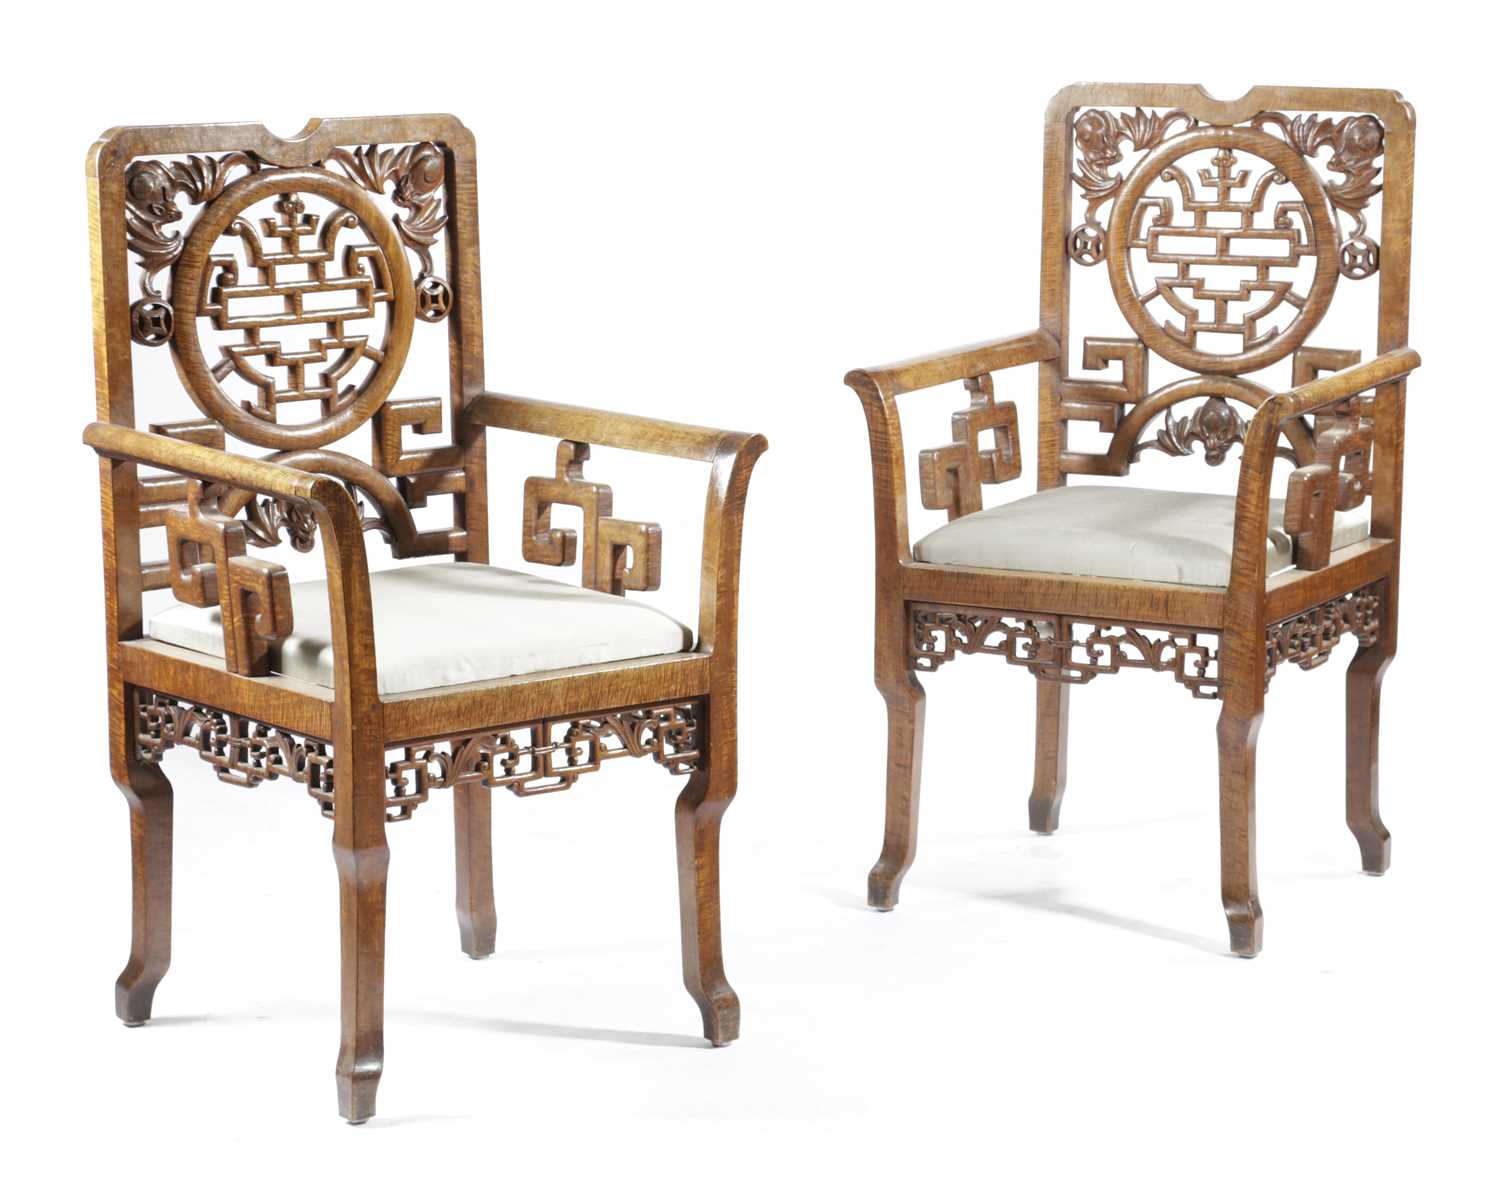 A PAIR OF CHINESE SOFTWOOD ARMCHAIRS LATE 19TH / EARLY 20TH CENTURY each with a pierced and carved